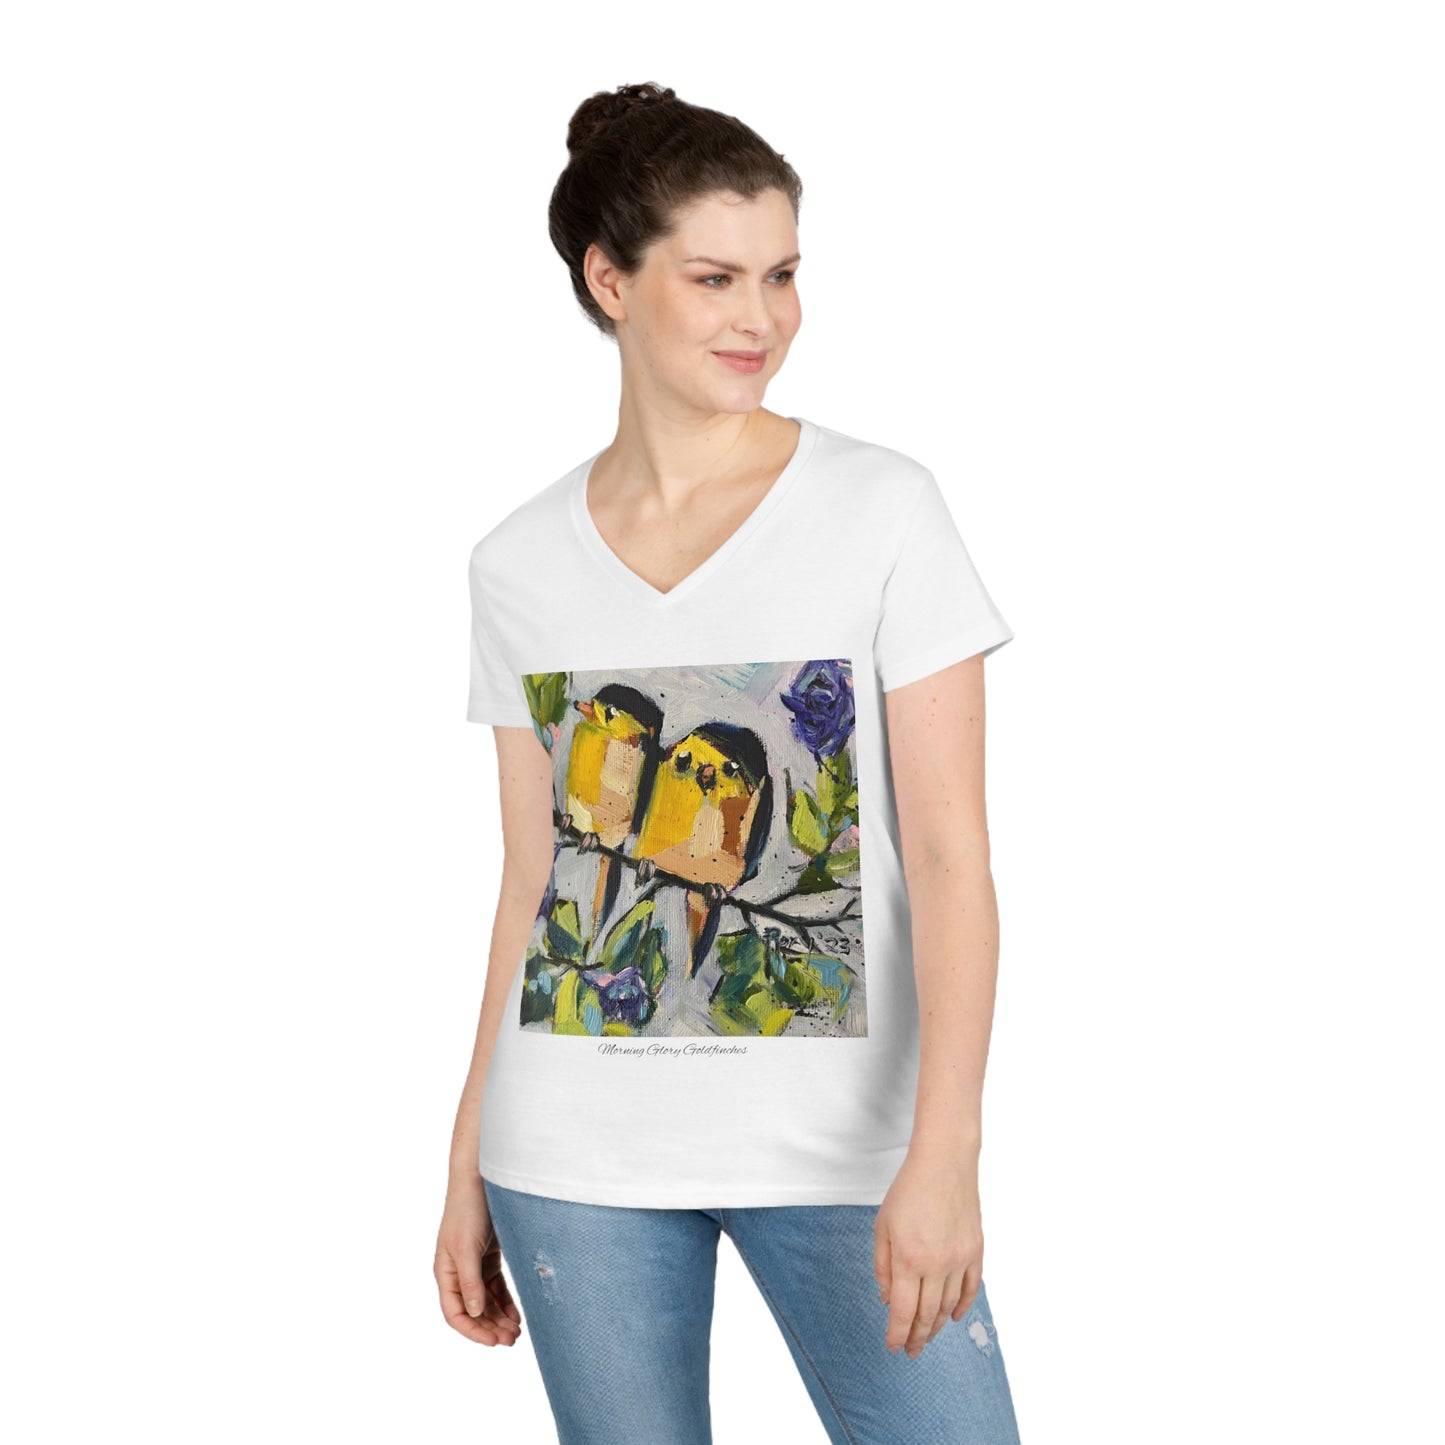 Morning Glory Goldfinches Ladies' V-Neck T-Shirt